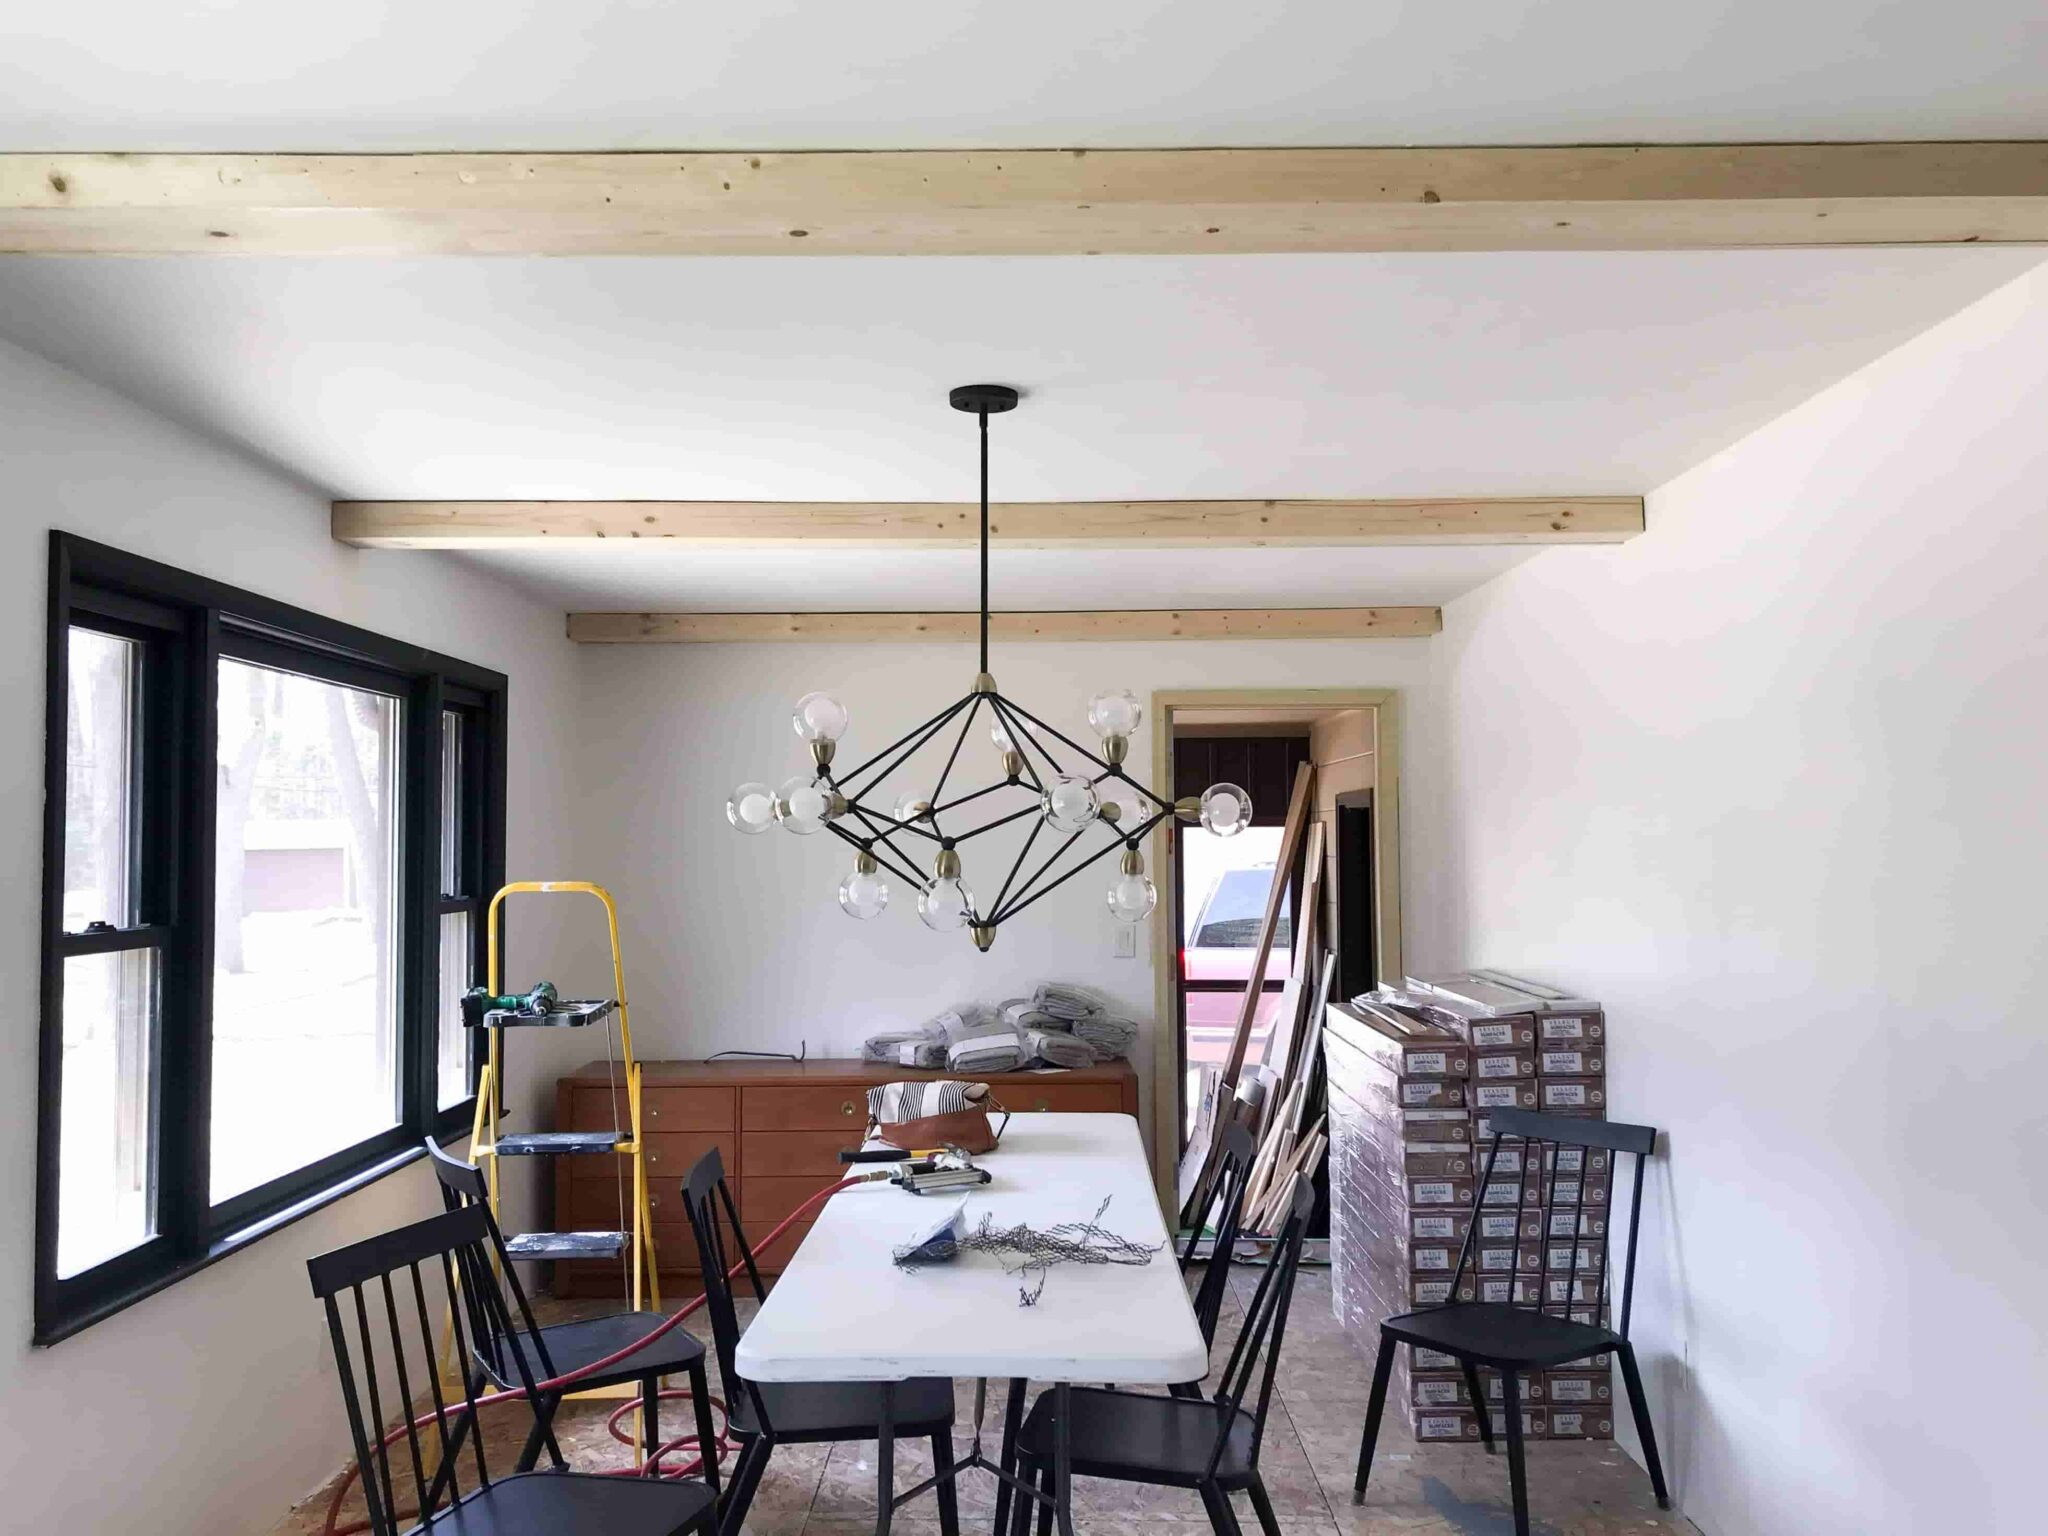 These Decorative Ceiling Beams Will Add Charm to Your Home